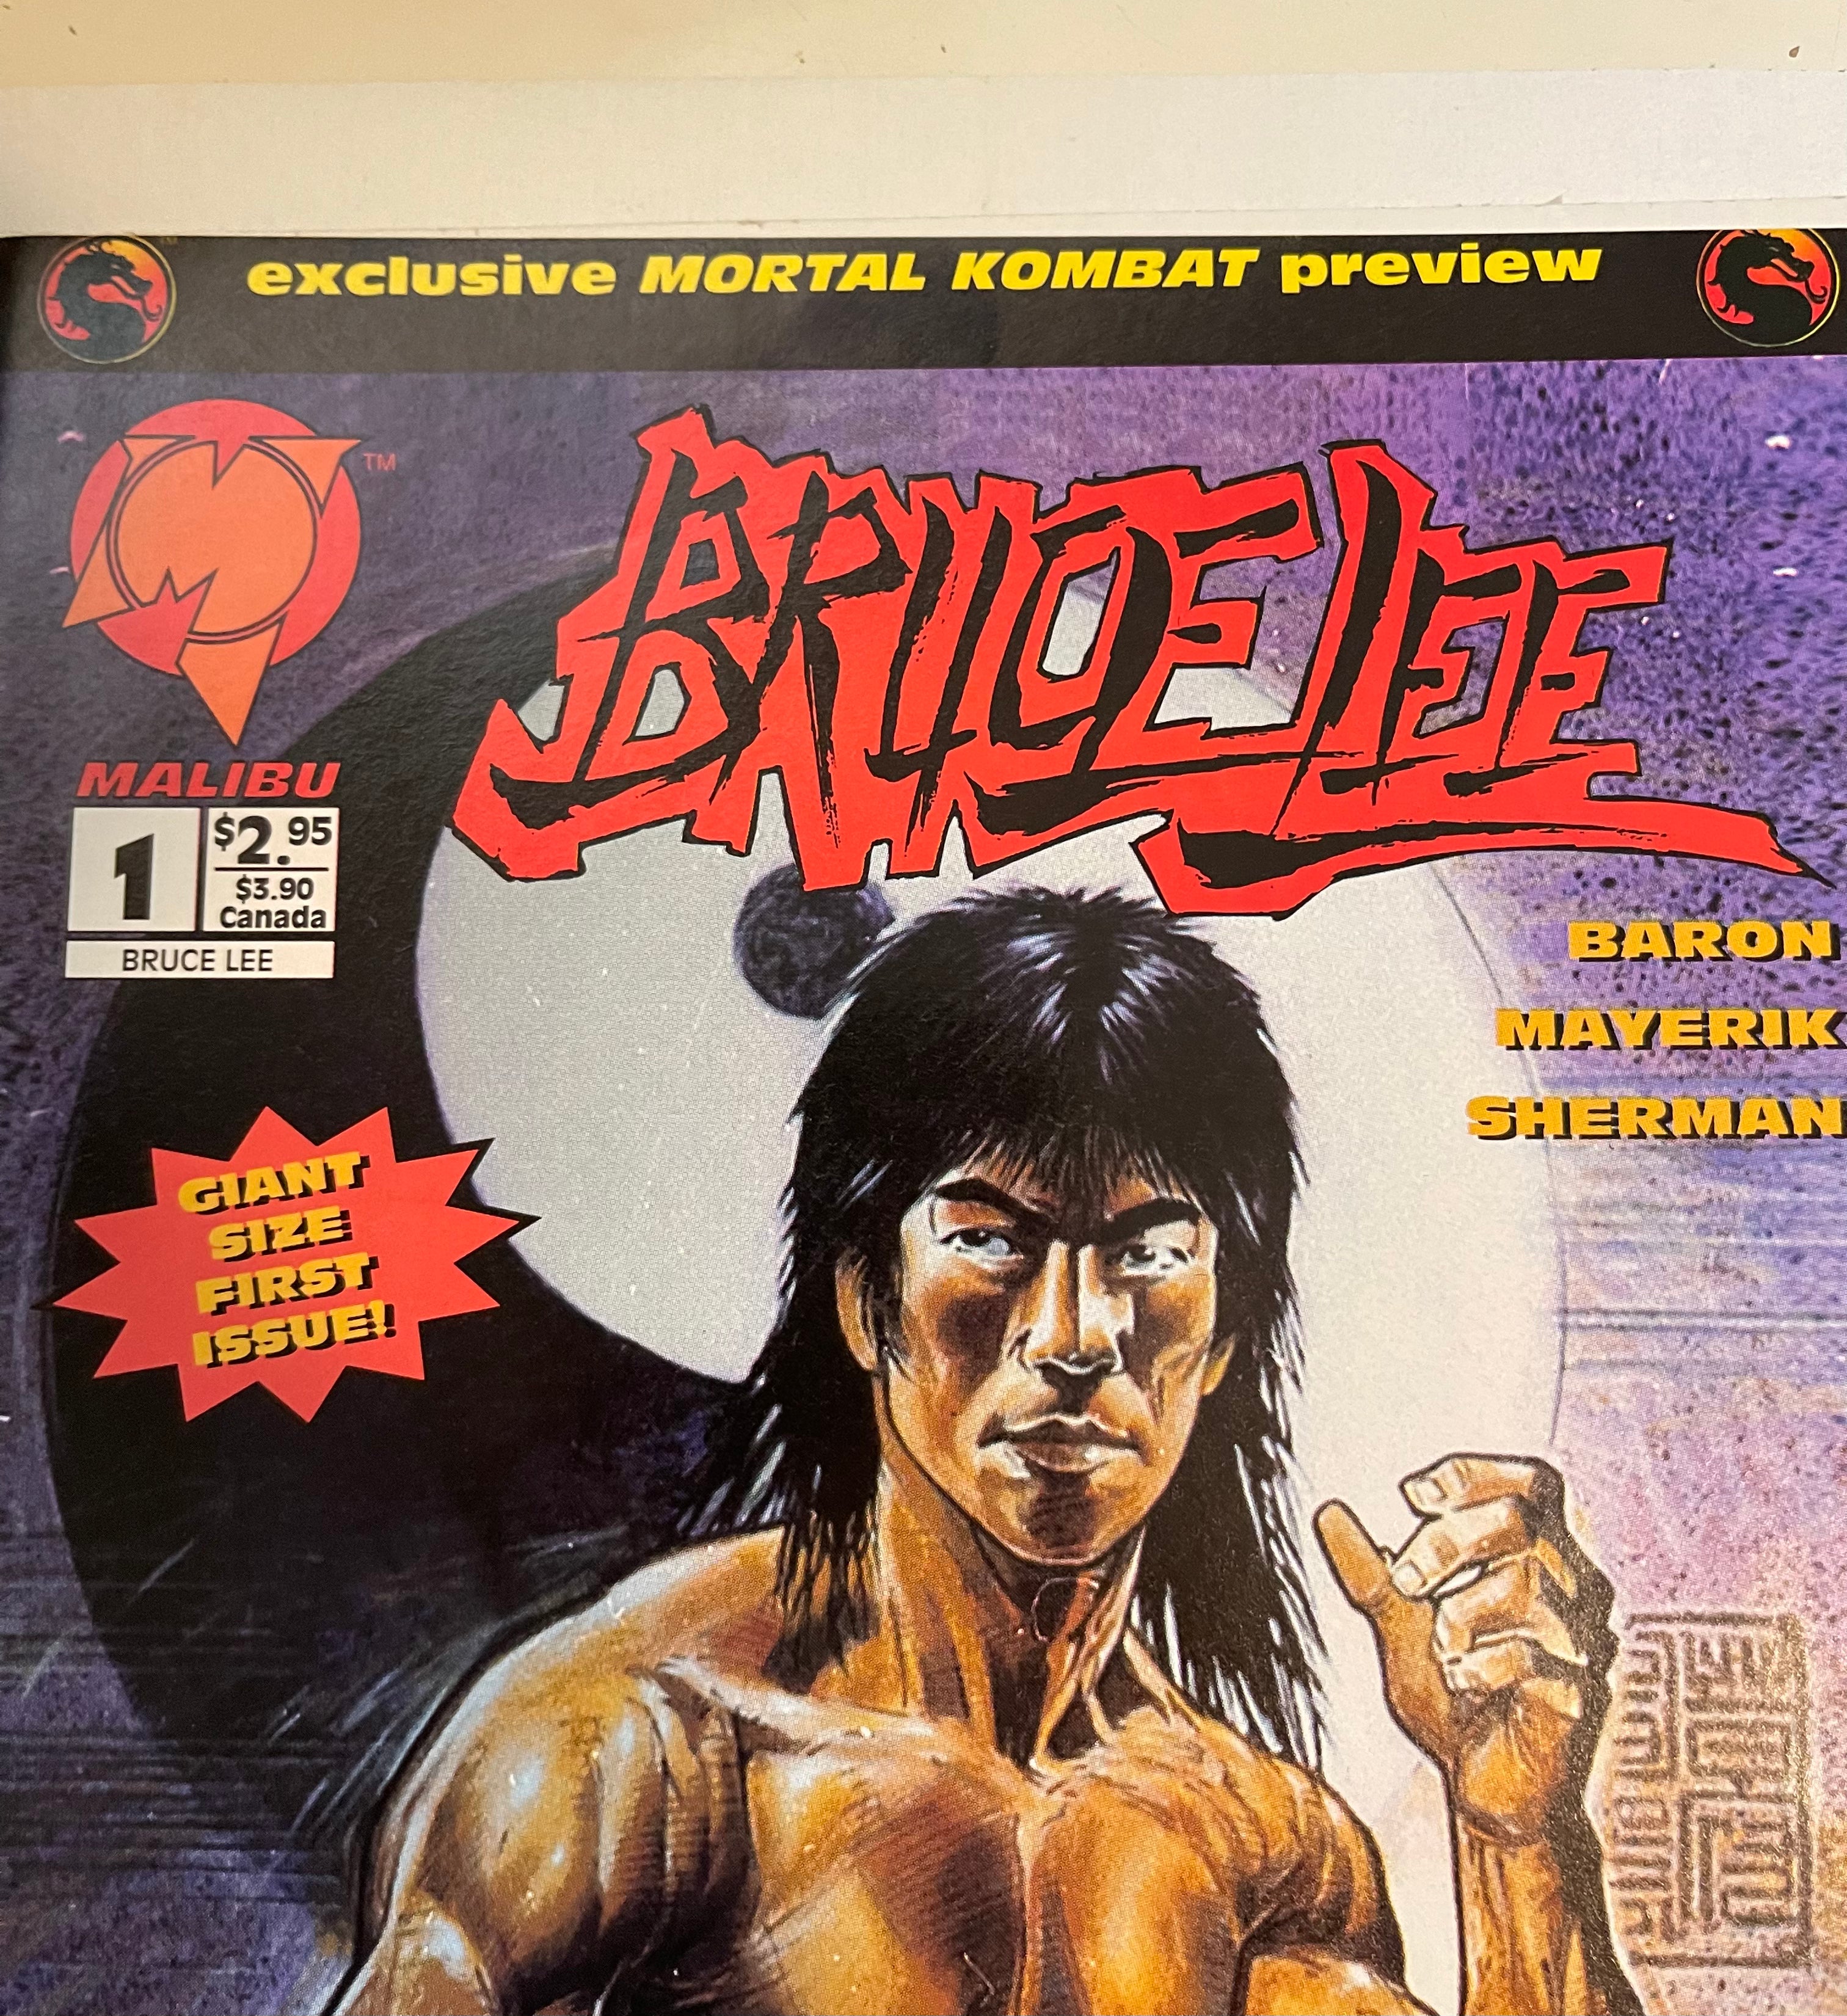 Bruce Lee comic with Mortal Combat preview 1990s